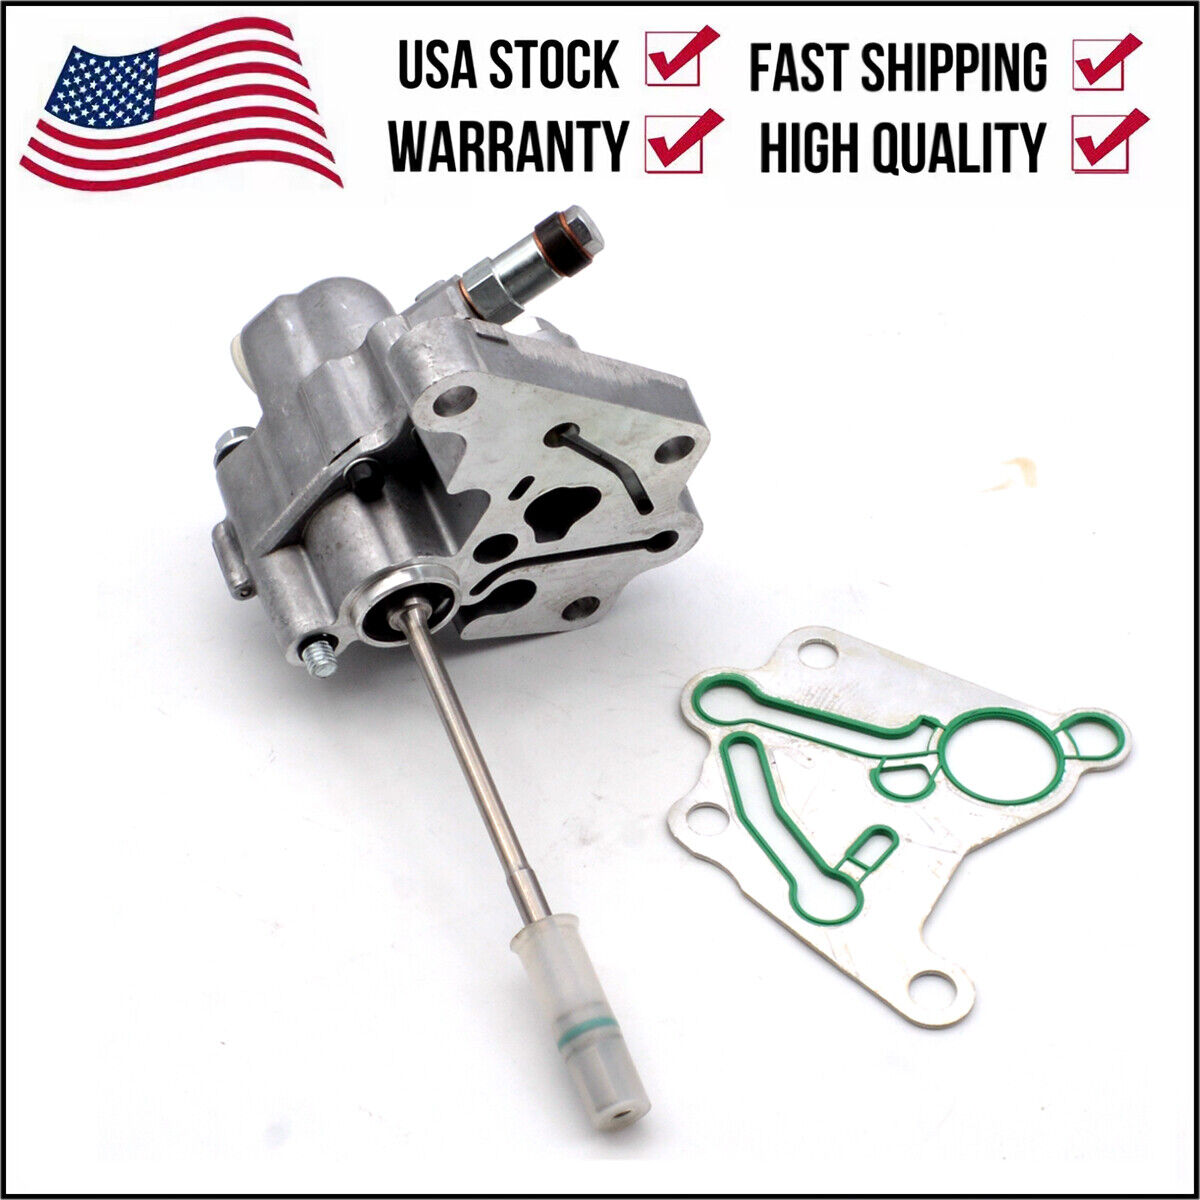 New Fuel Pump For Volvo Truck VN VNL VHD Series D/FH/FM12 Engine 21067955 US